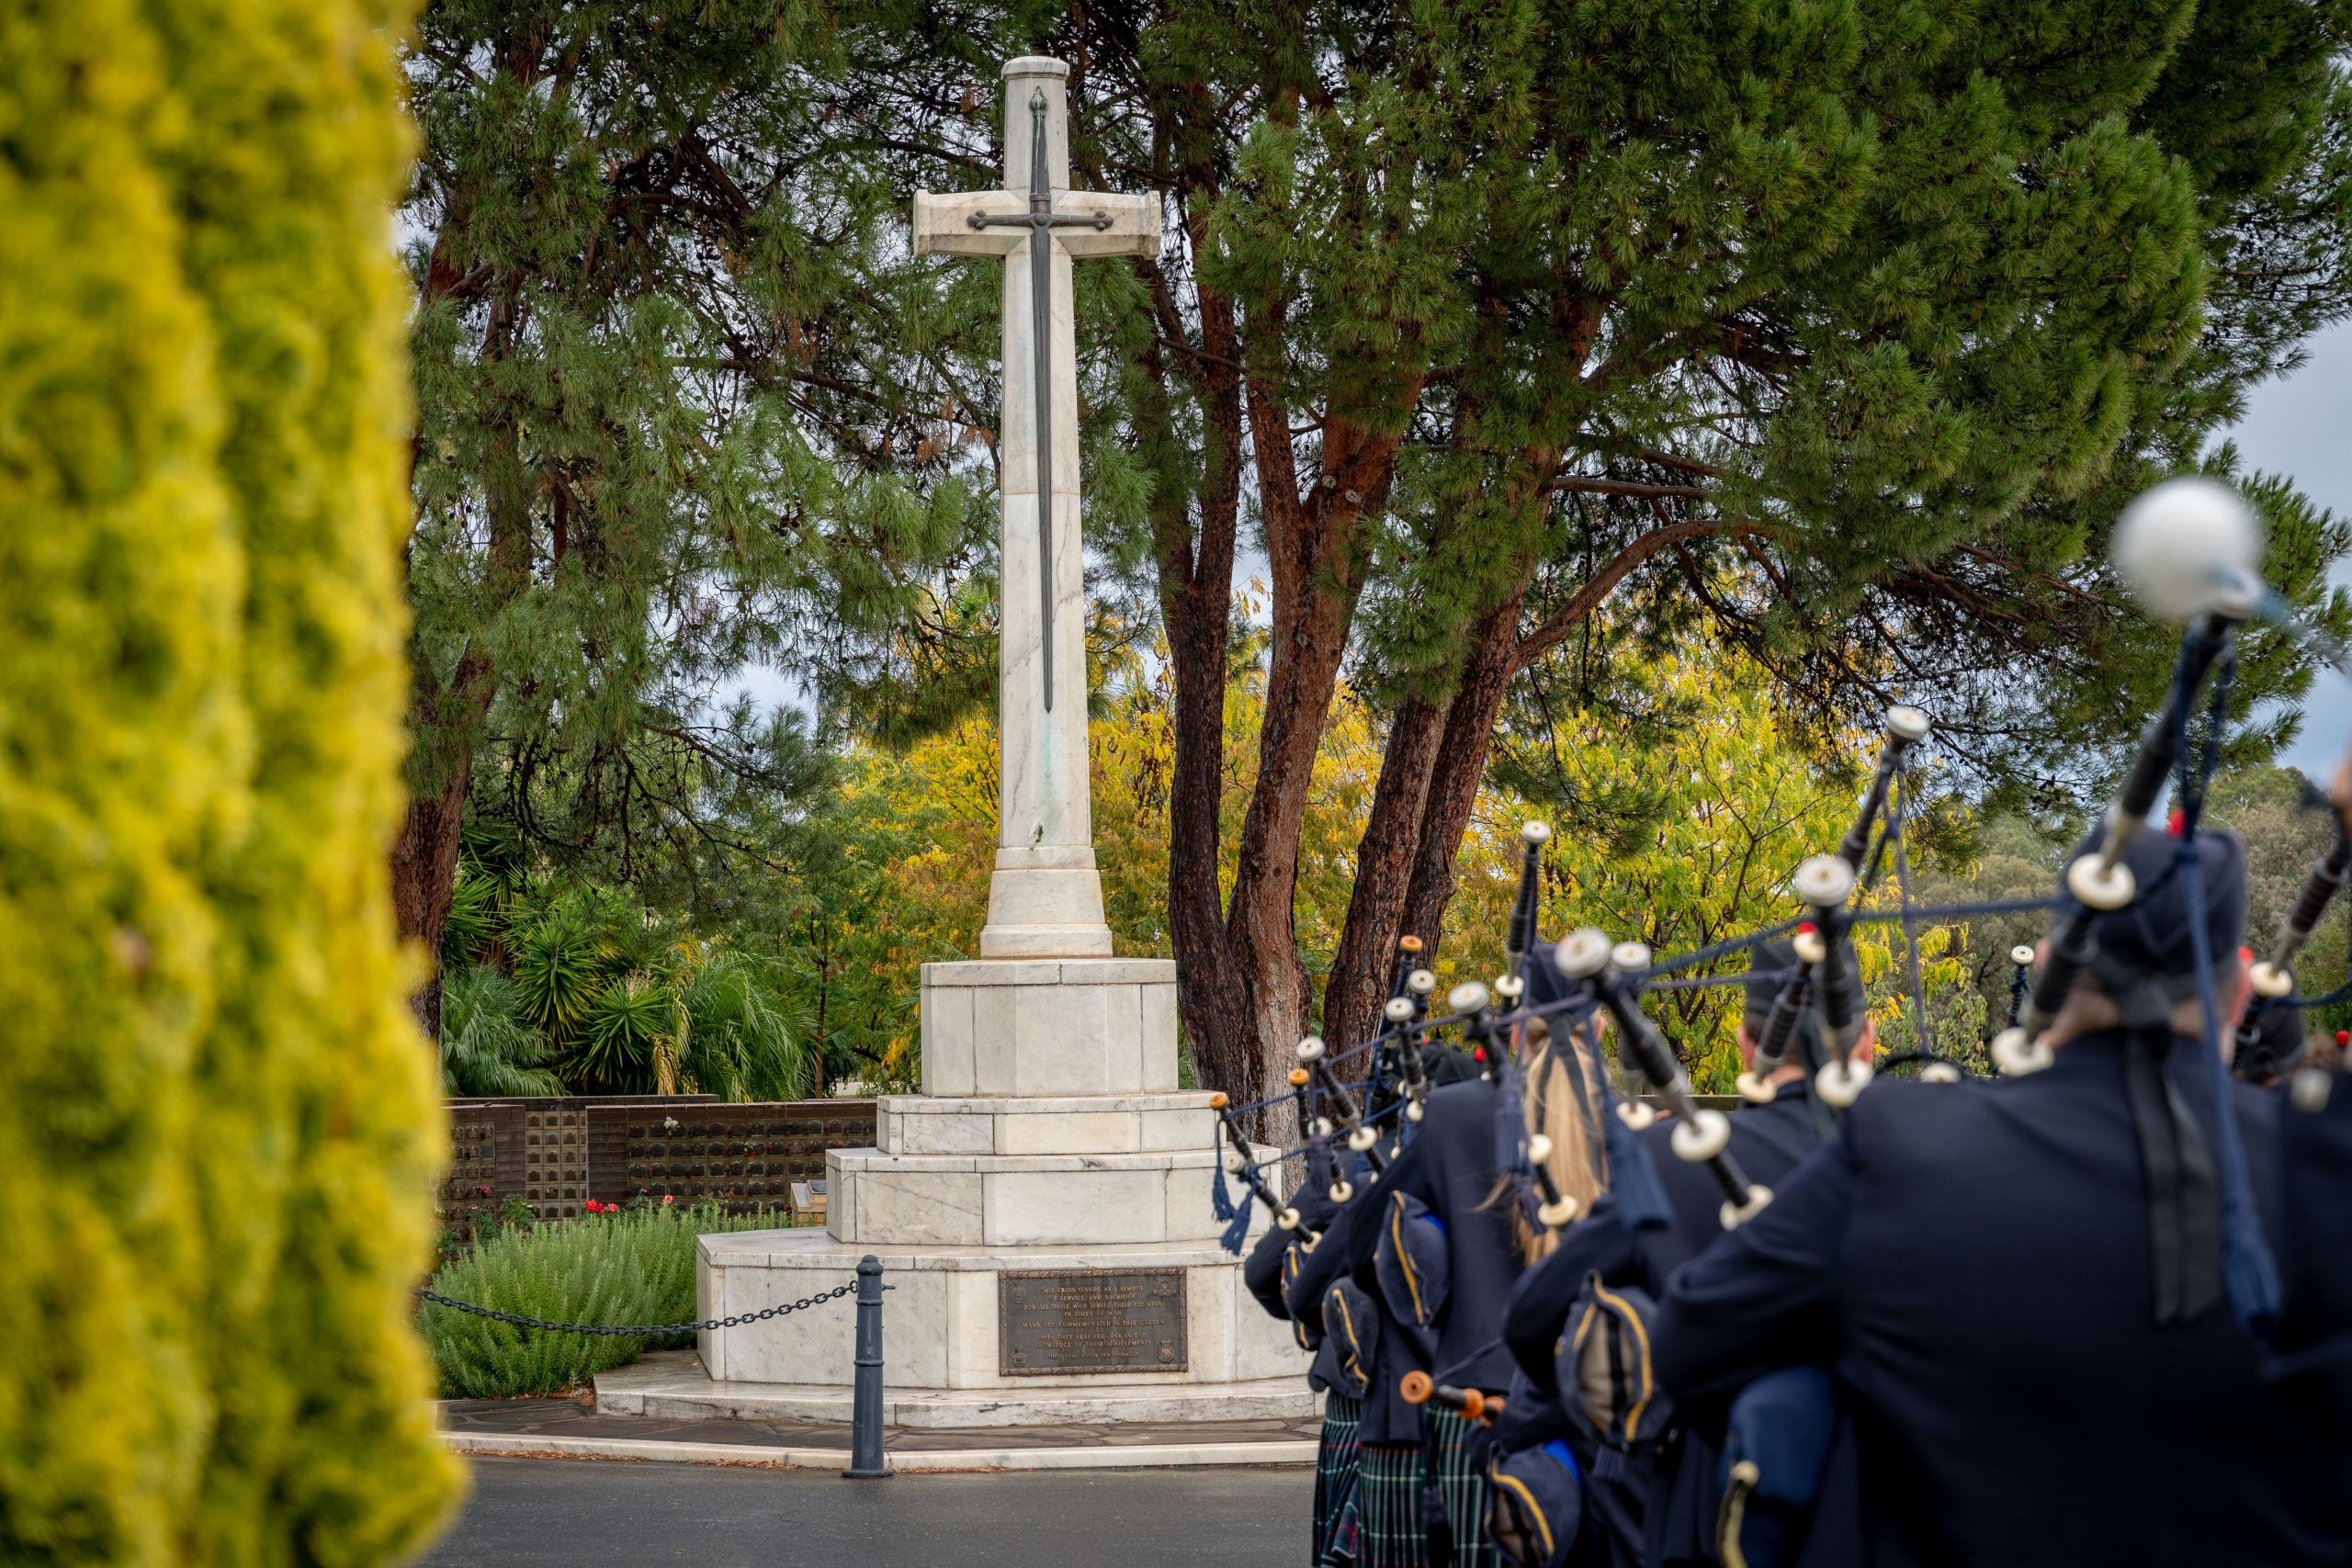 Scotch College Band marching towards the Cross of Remembrance